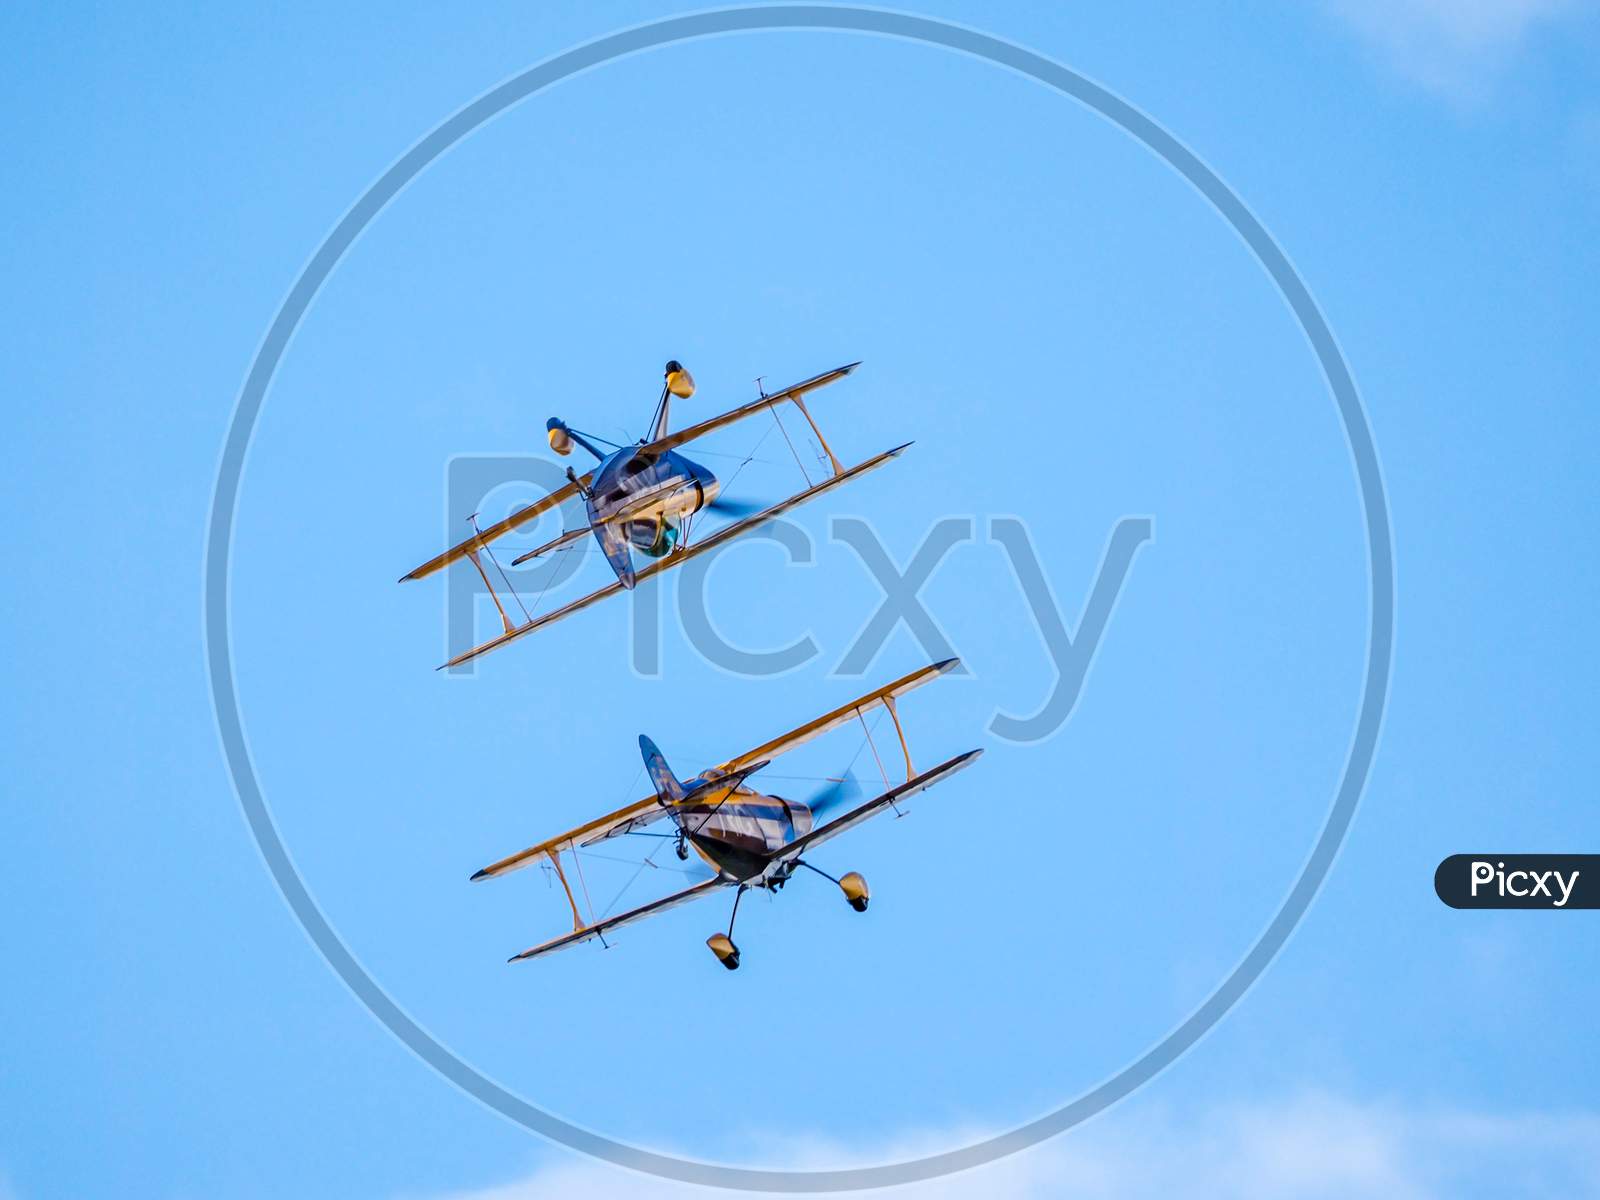 The Trig Aerobatic Team Flying Over Biggin Hill Airport